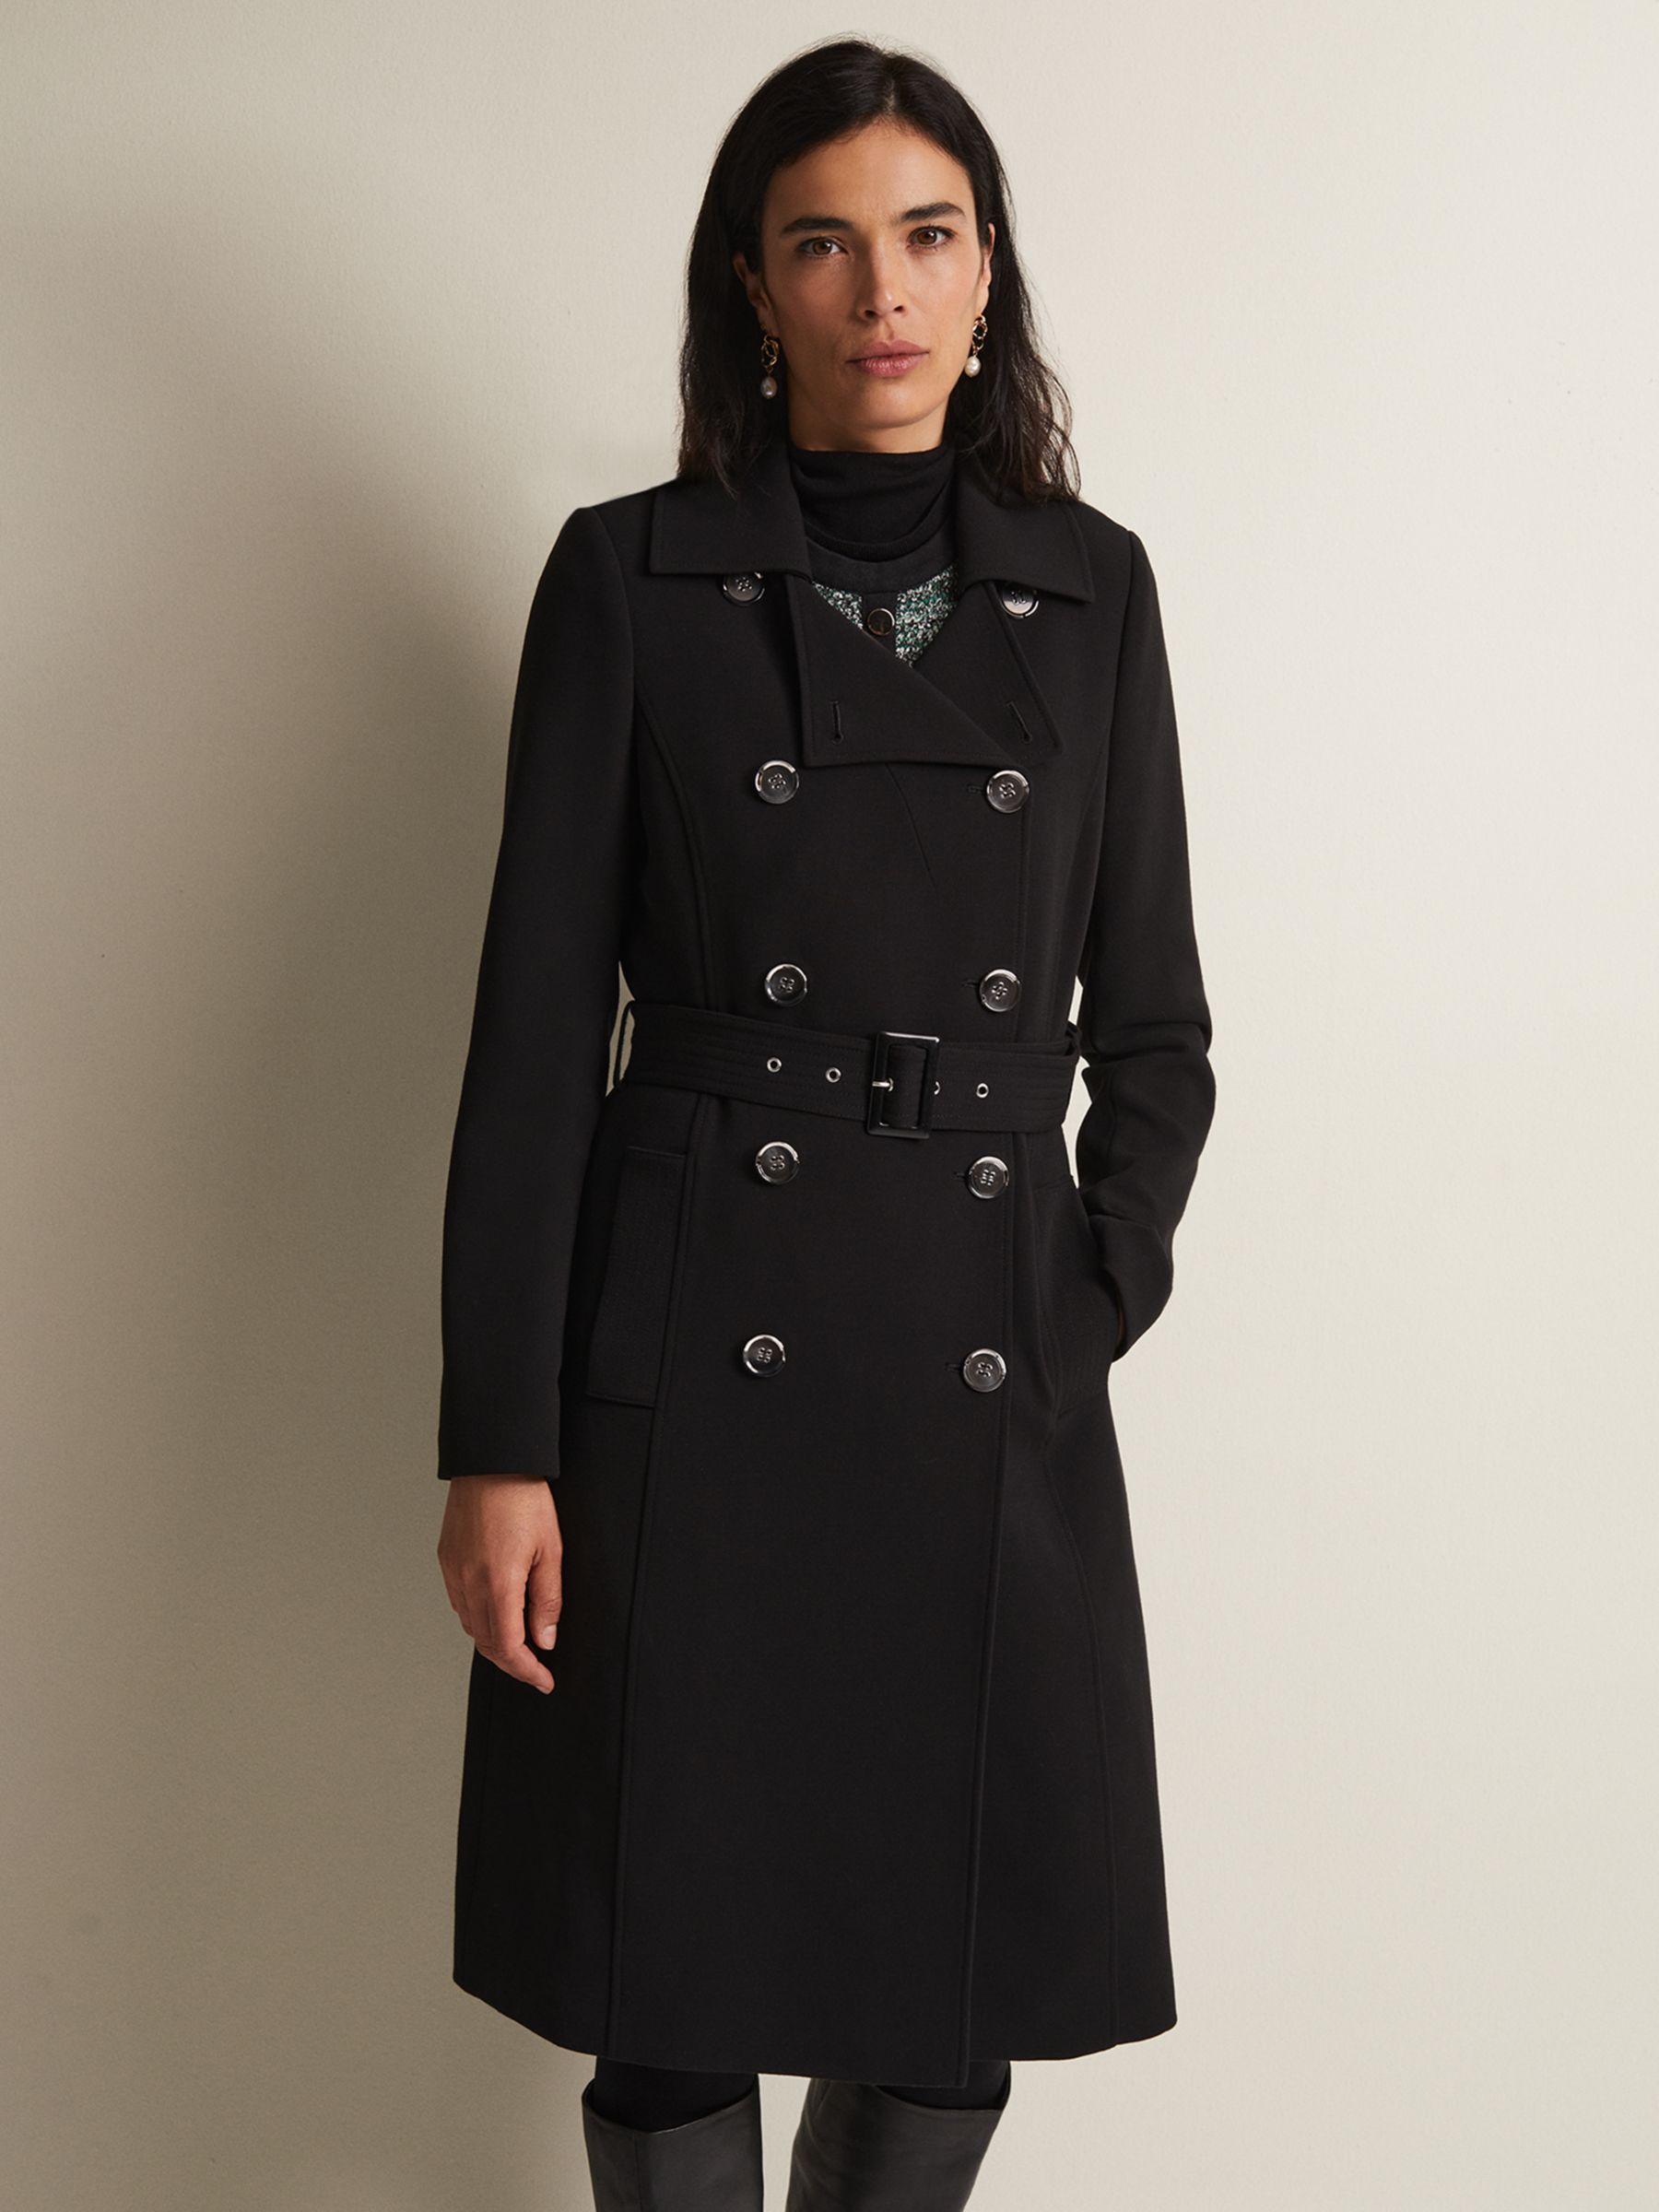 Phase Eight Layana Smart Trench Coat, Black at John Lewis & Partners